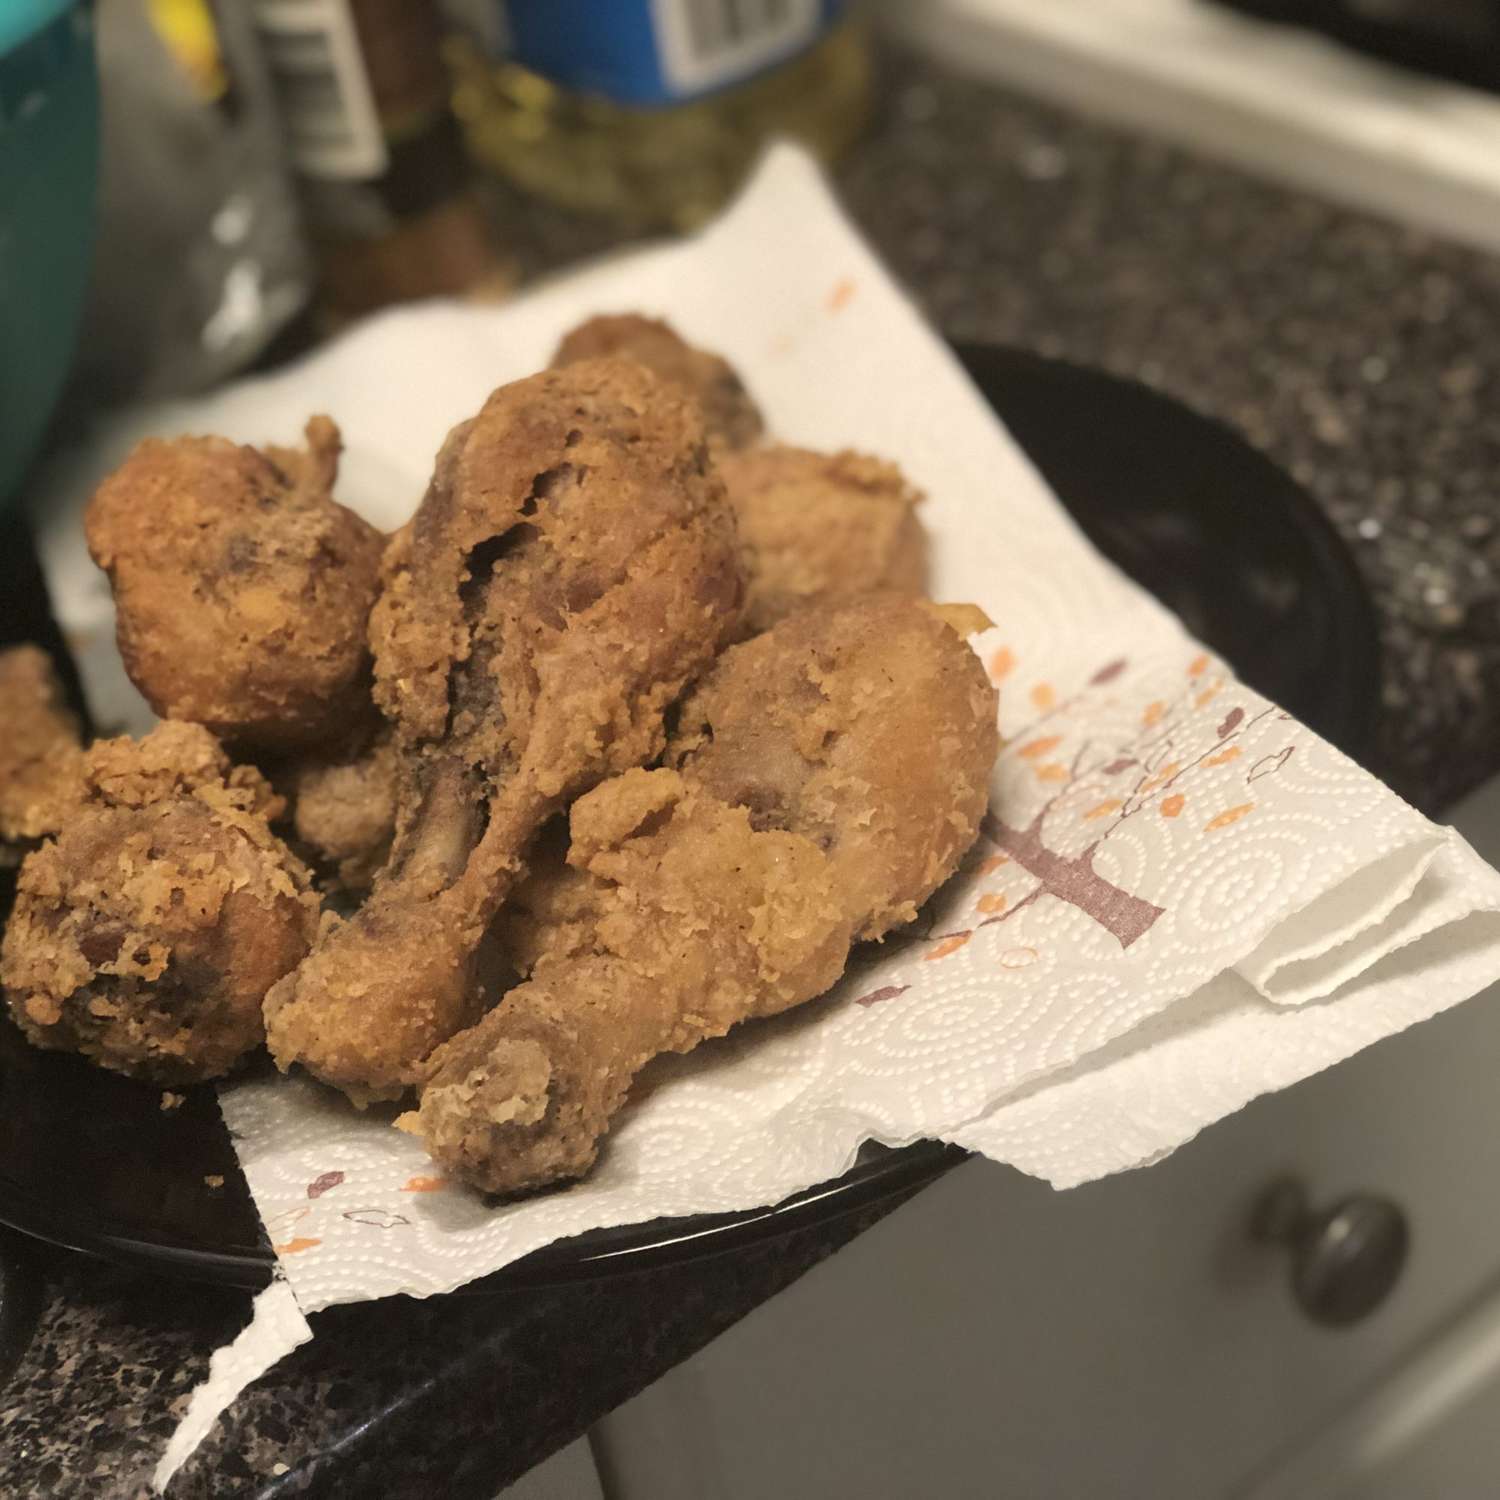 Mom's Old Fashioned Fried Chicken